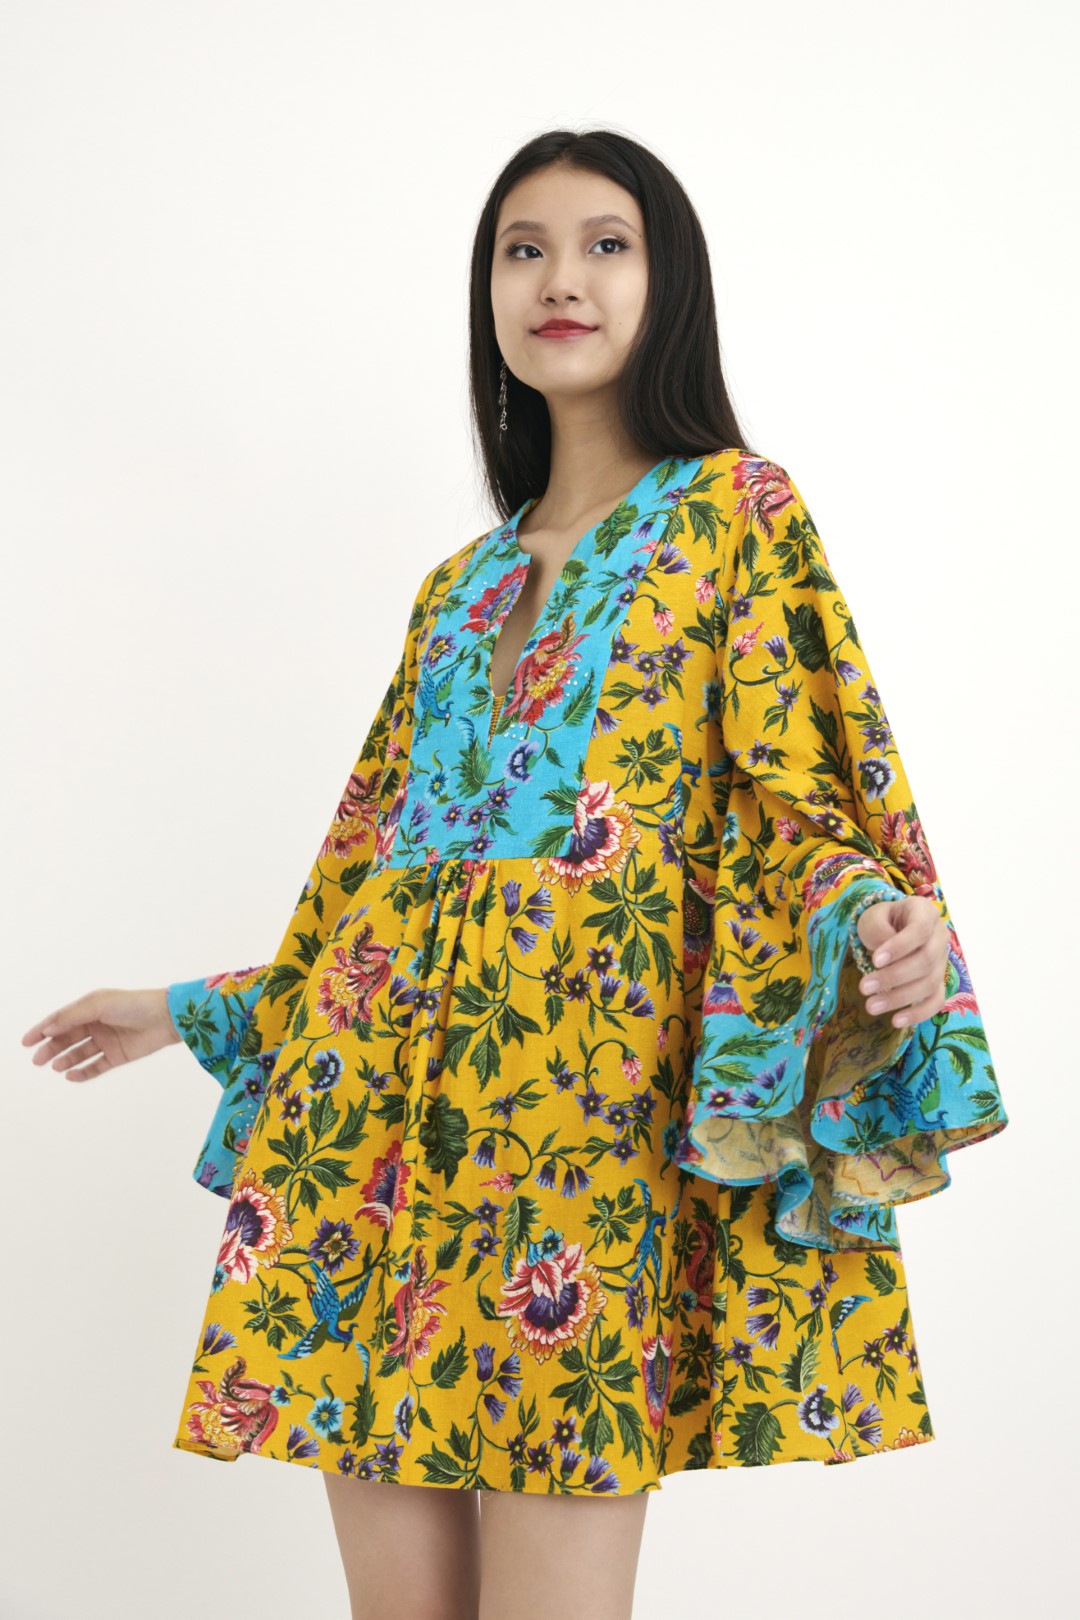 "Handwoven yellow chintz Hand-painted print and blue chintz detailed tunic with hand embroidery in french knots and sequins detail. 100% Handwoven cotton; Lining: 100% cotton 100% Azo Free Dry Clean Only"